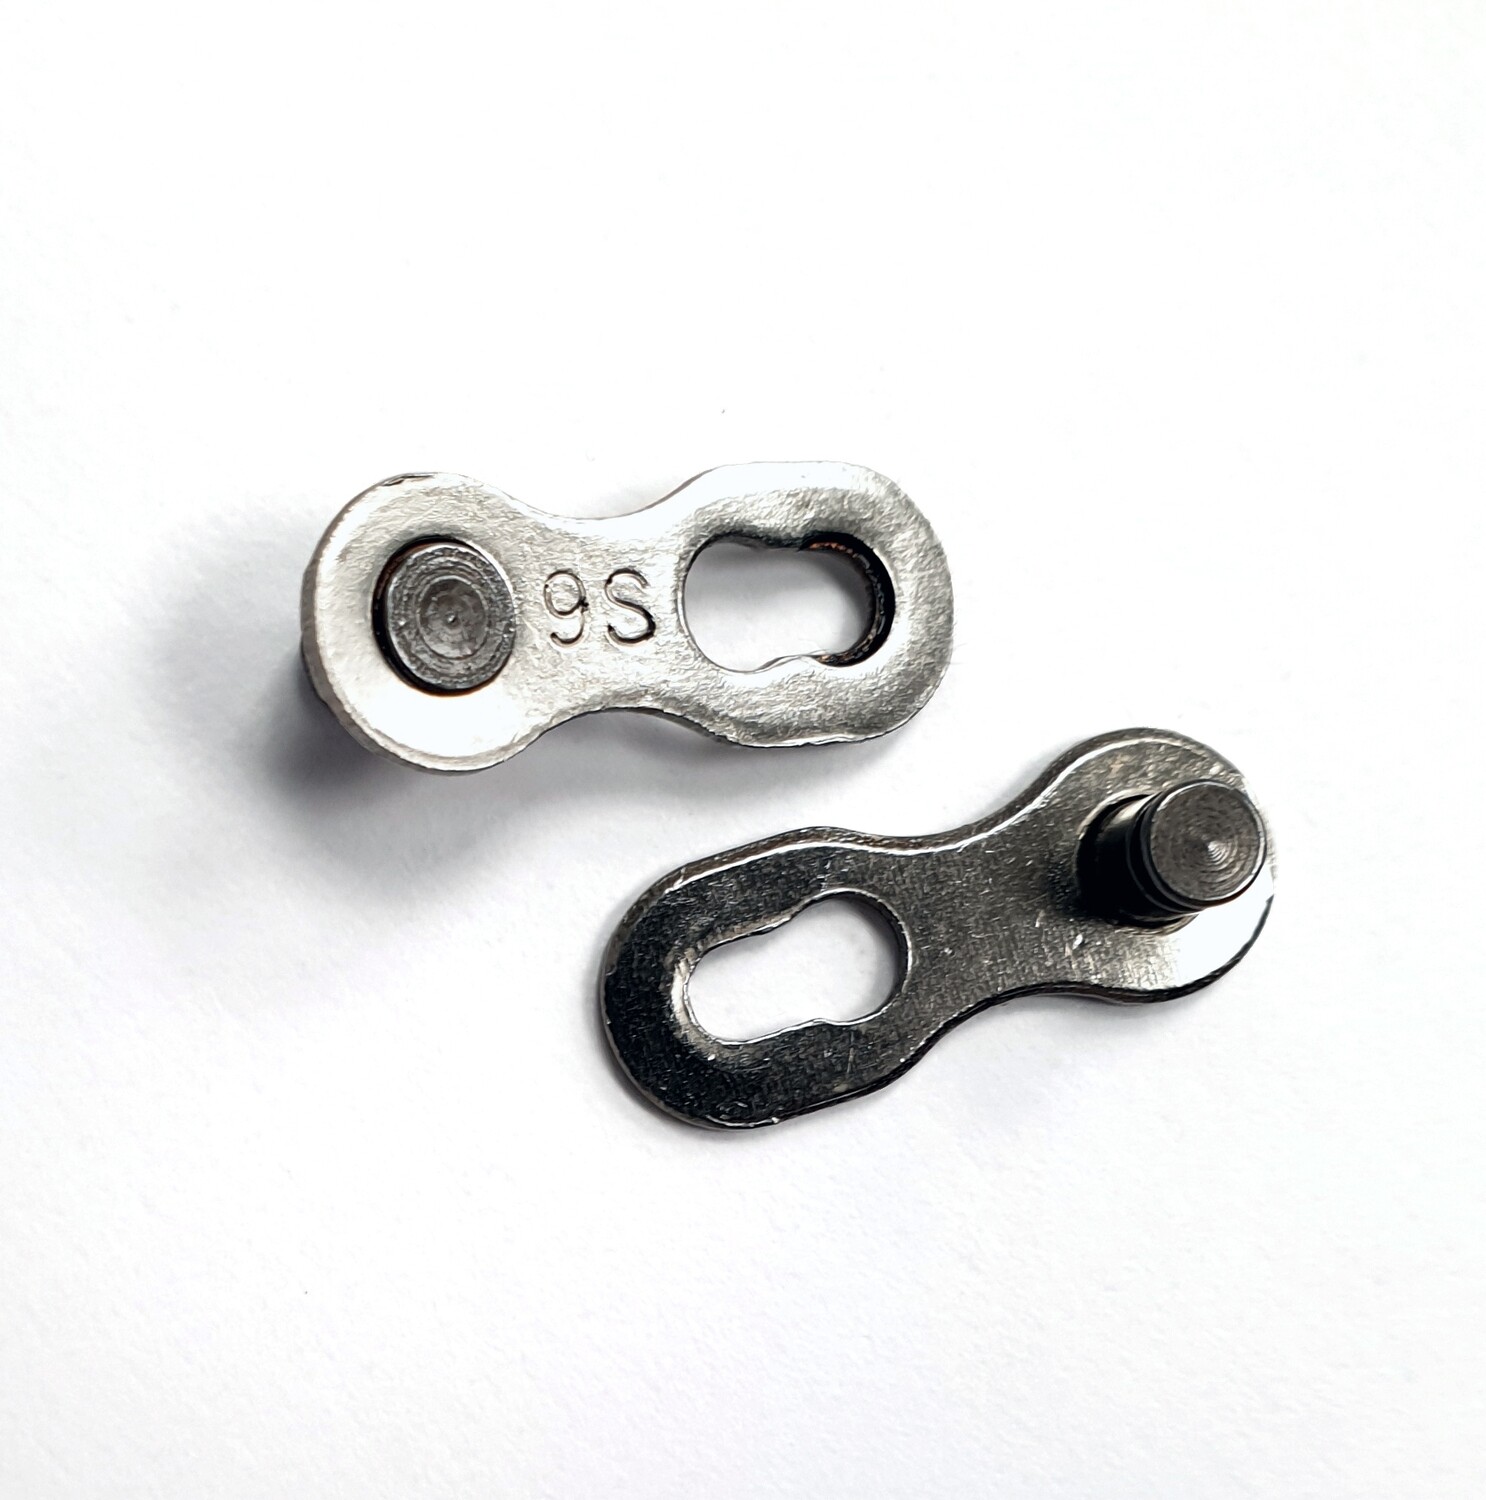 9 Speed Chain Quick Link Connector - PAIR